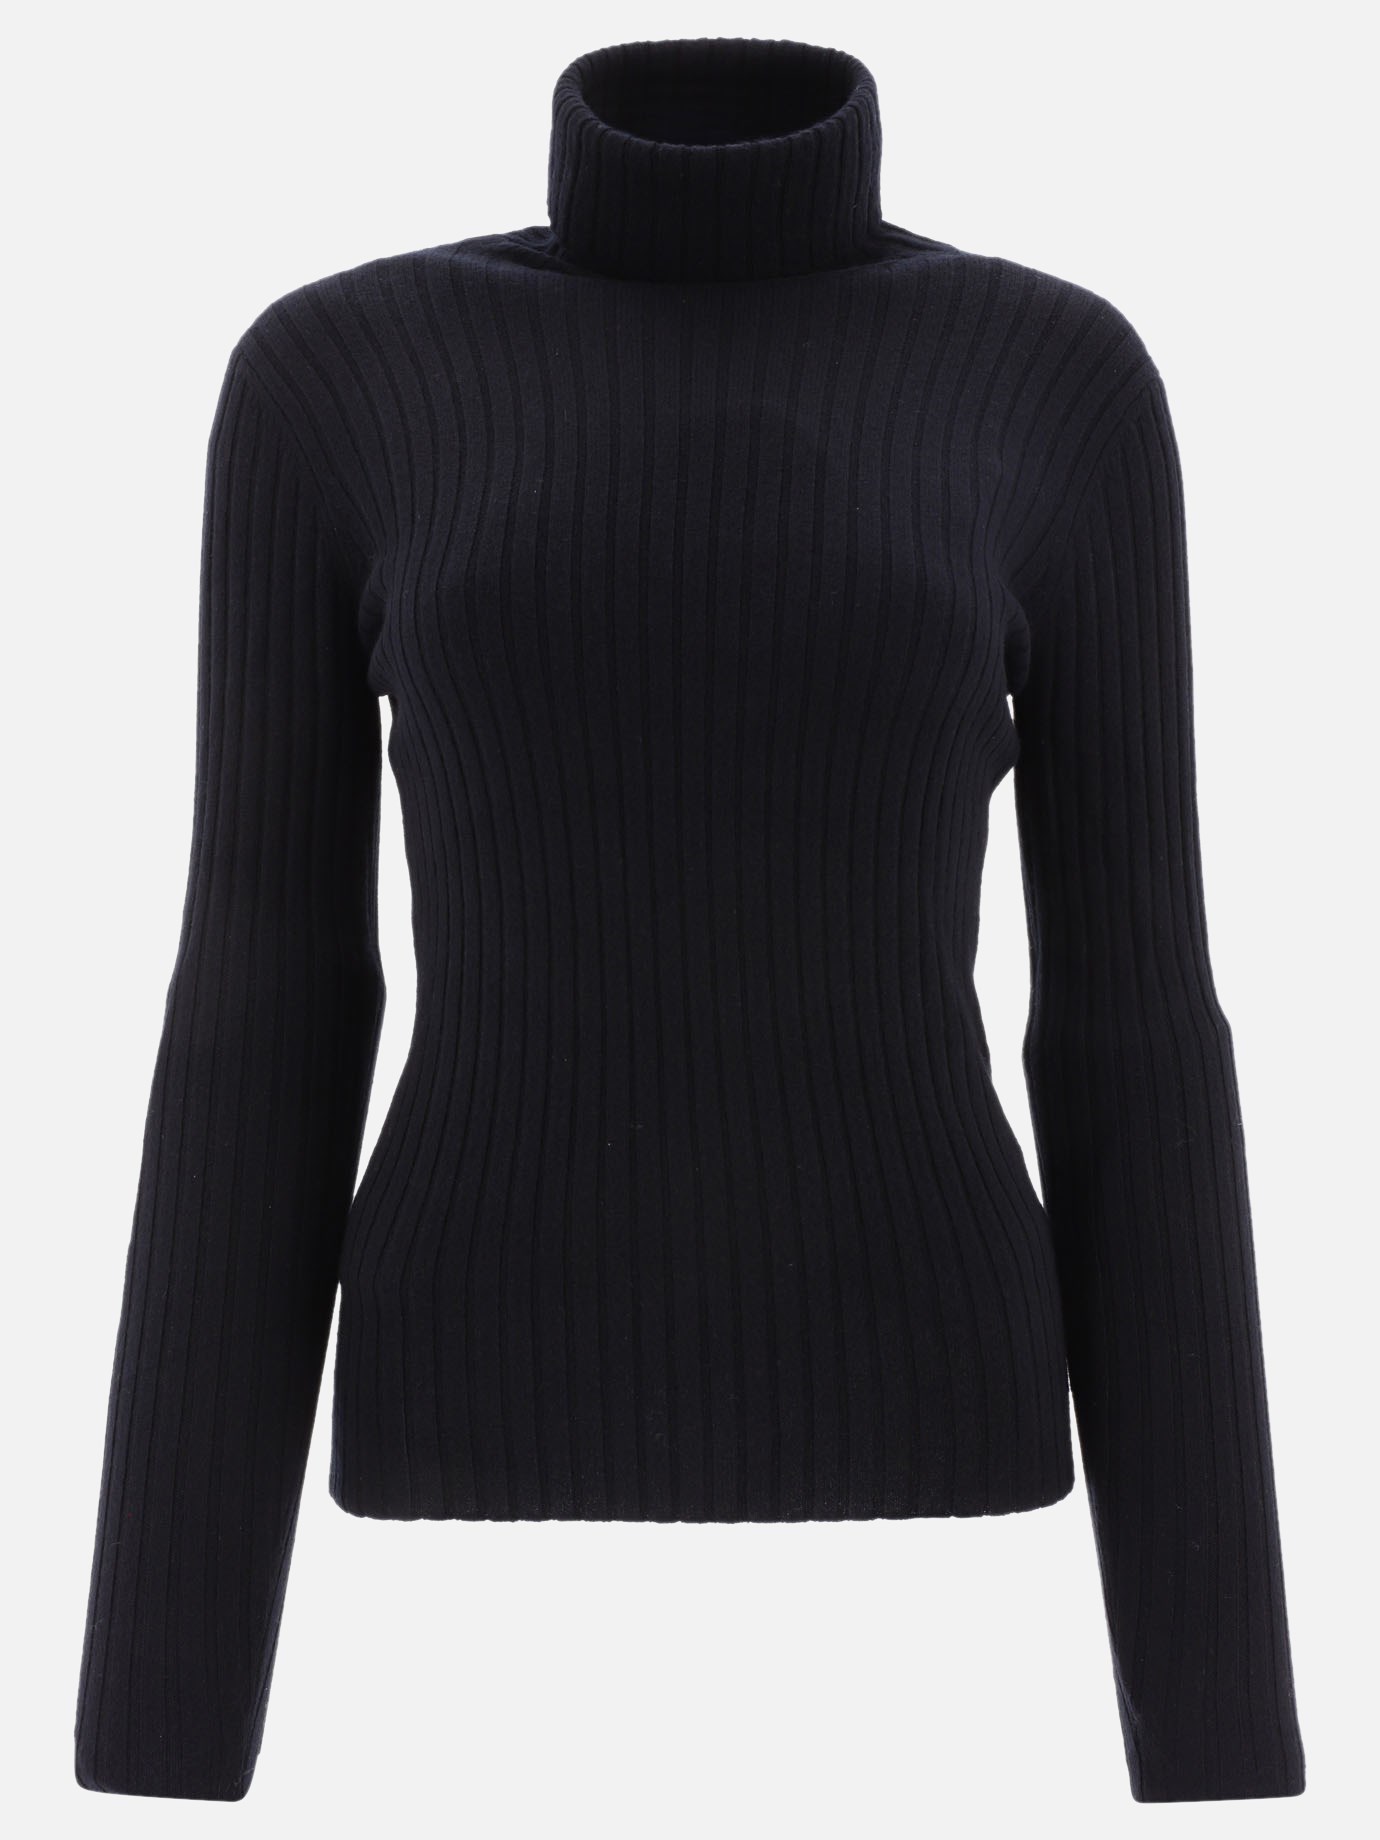 Ribbed turtleneck sweaterby Allude - 3